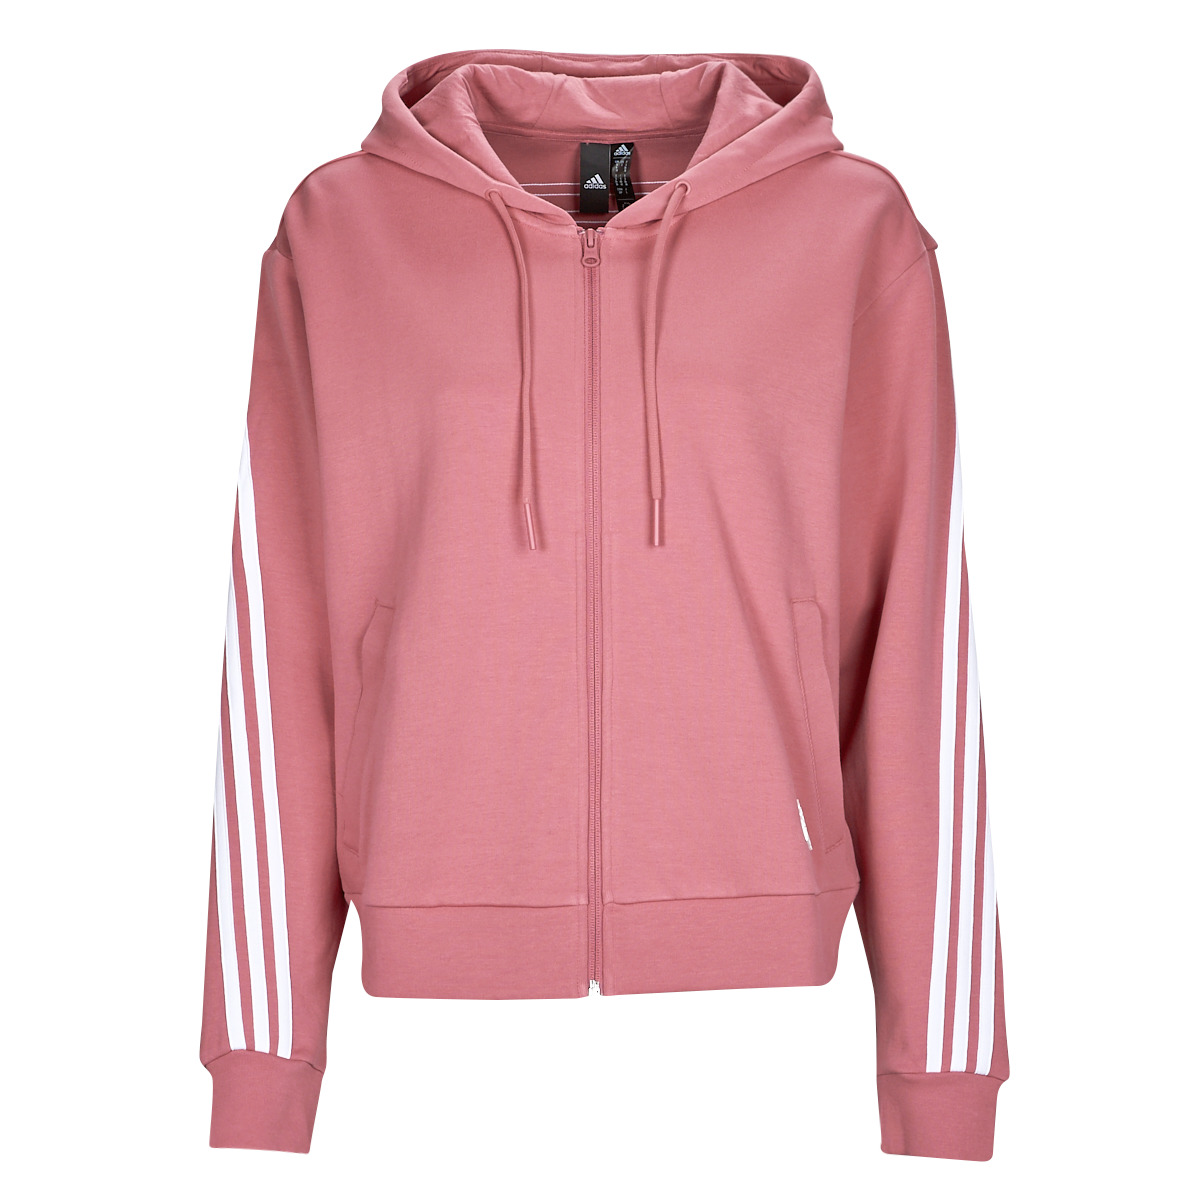 Adidas Sportswear Pink Clothing - Europe FZ FI delivery Women € 66,40 | Spartoo - ! 3S Jackets Fast